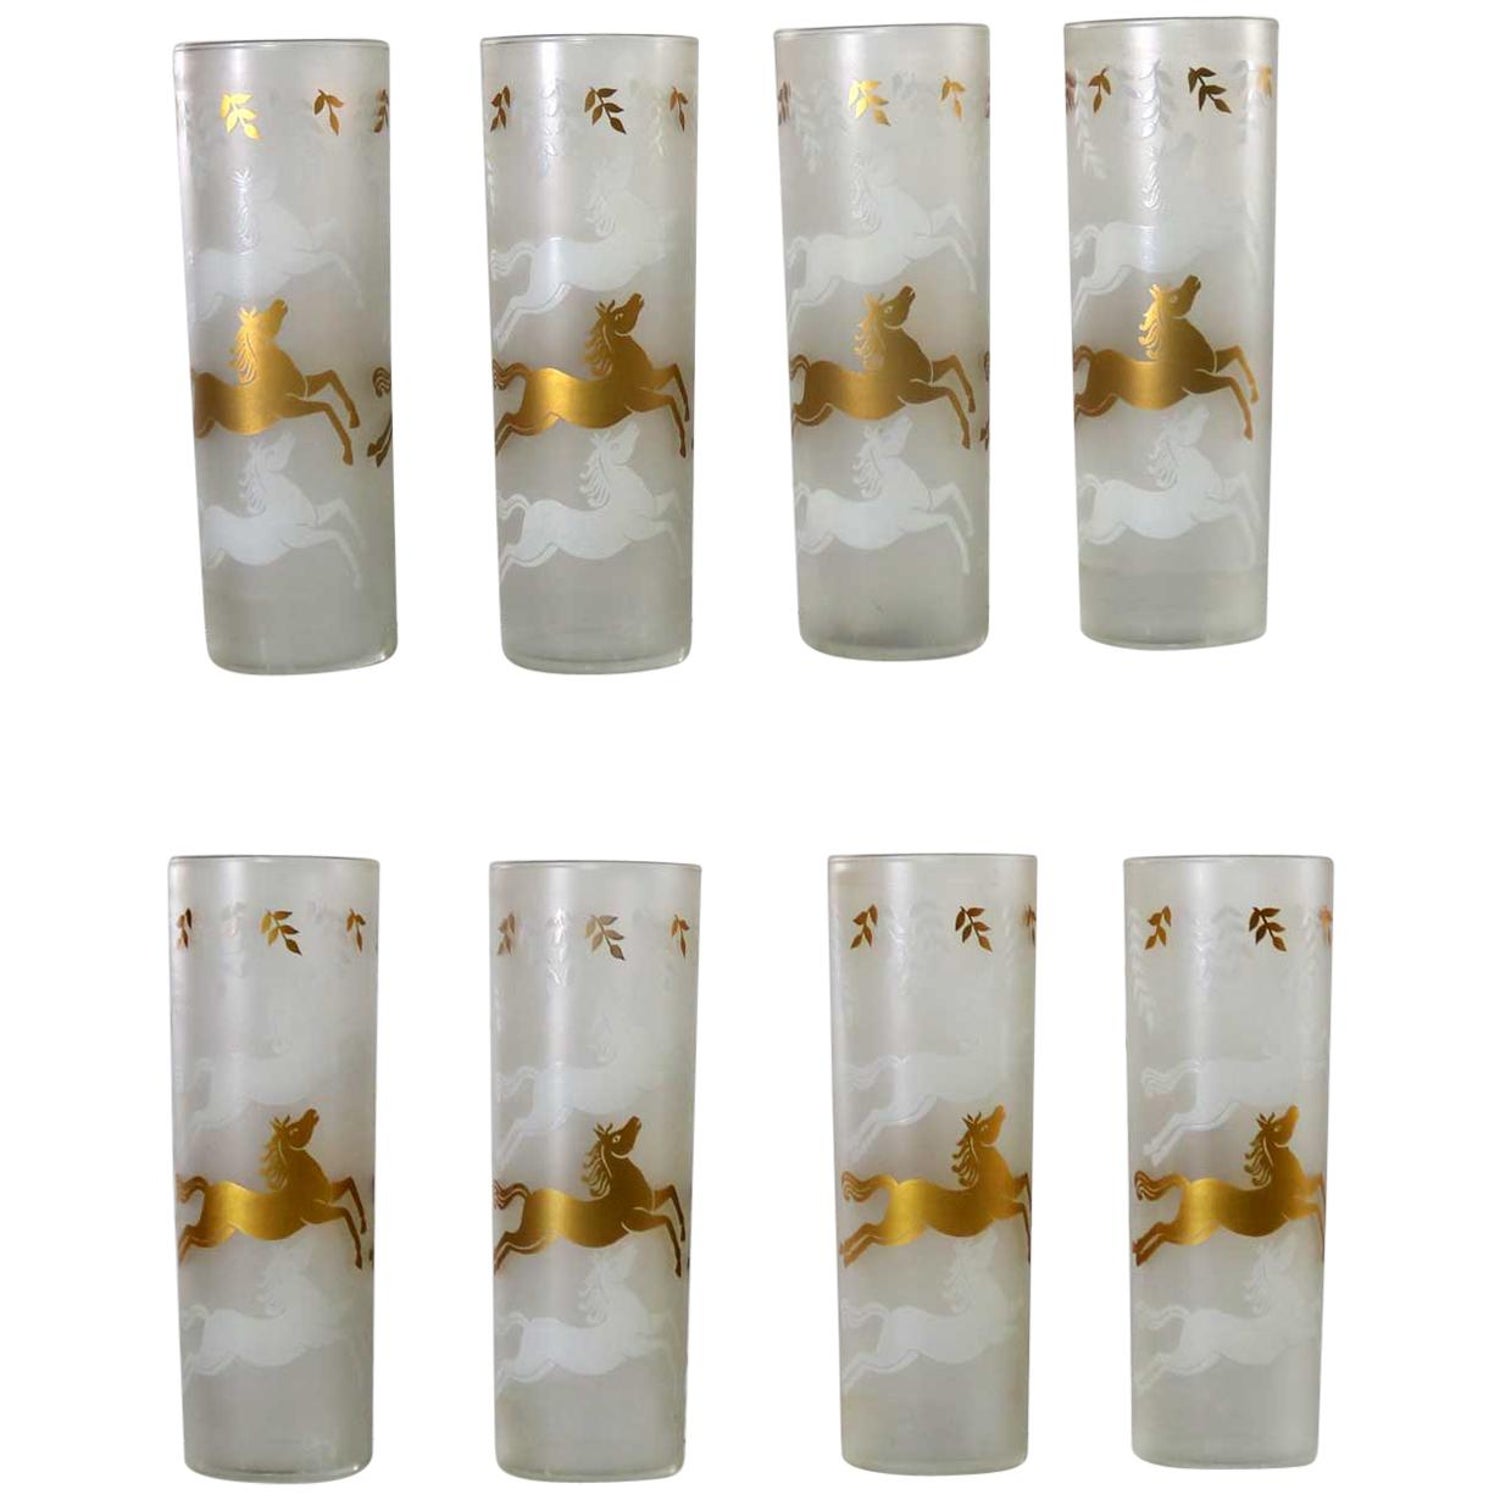 https://a.1stdibscdn.com/boxed-set-of-8-mcm-libbey-cavalcade-galloping-horse-tom-collins-cocktail-glasses-for-sale/1121189/f_131726711546503050601/13172671_master.jpg?width=1500